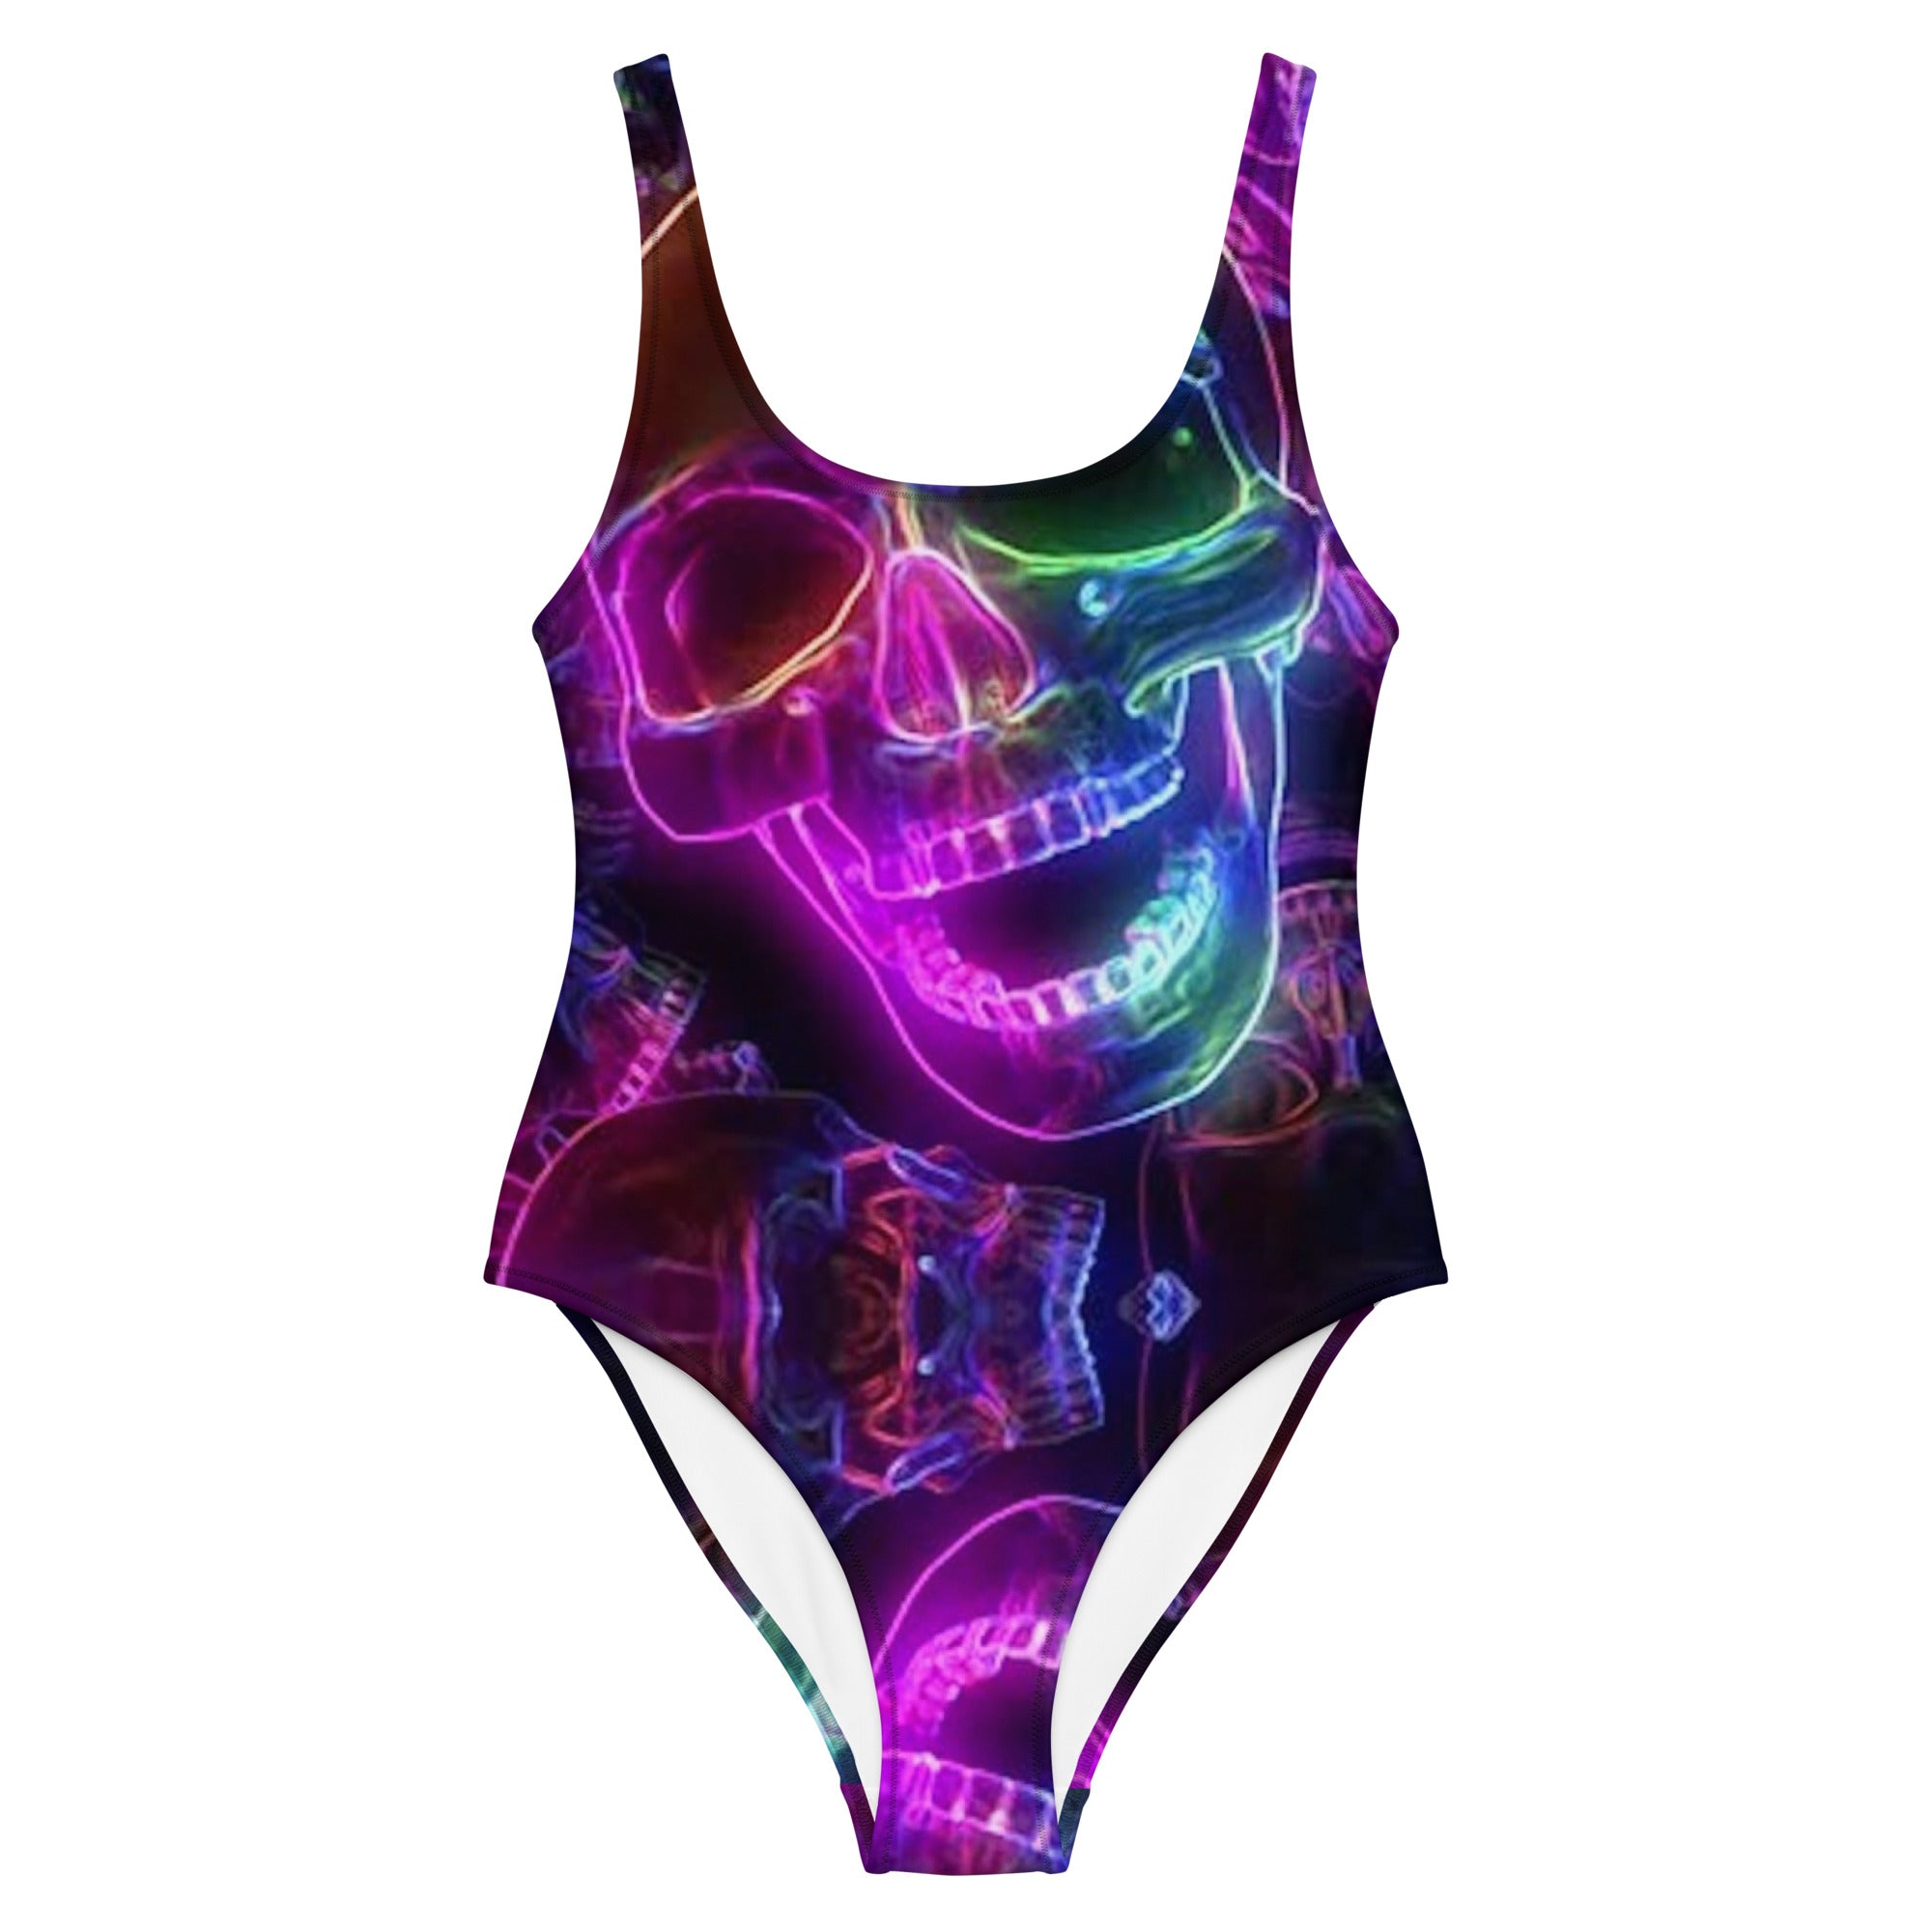 The NEON SKULL RAVE BODYSUIT is perfect for festival-goers looking to stand out. This stylish and eye-catching outfit features neon elements to give you an edgy look that's sure to turn heads. You'll be comfortable and confident in this one-piece that's designed to make sure you shine in any crowd.